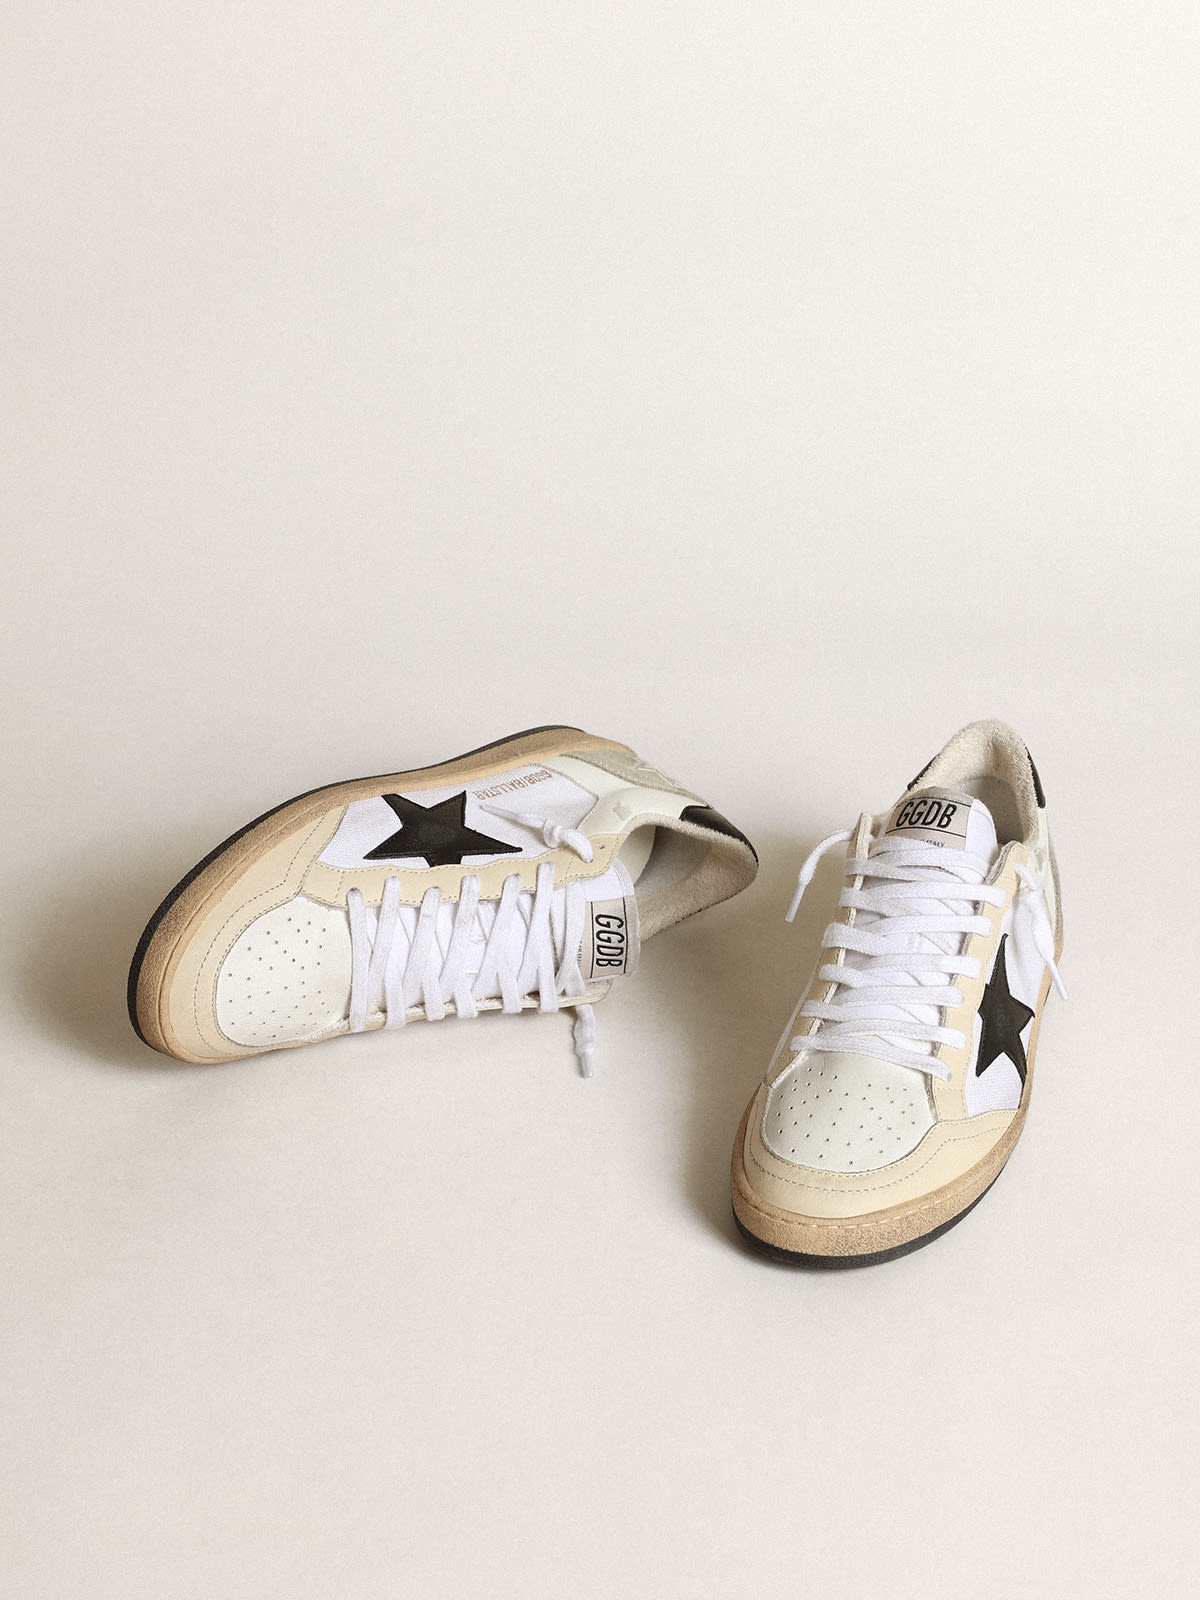 Women’s Ball Star sneakers in white canvas and leather with ivory leather inserts and black nappa le - 2